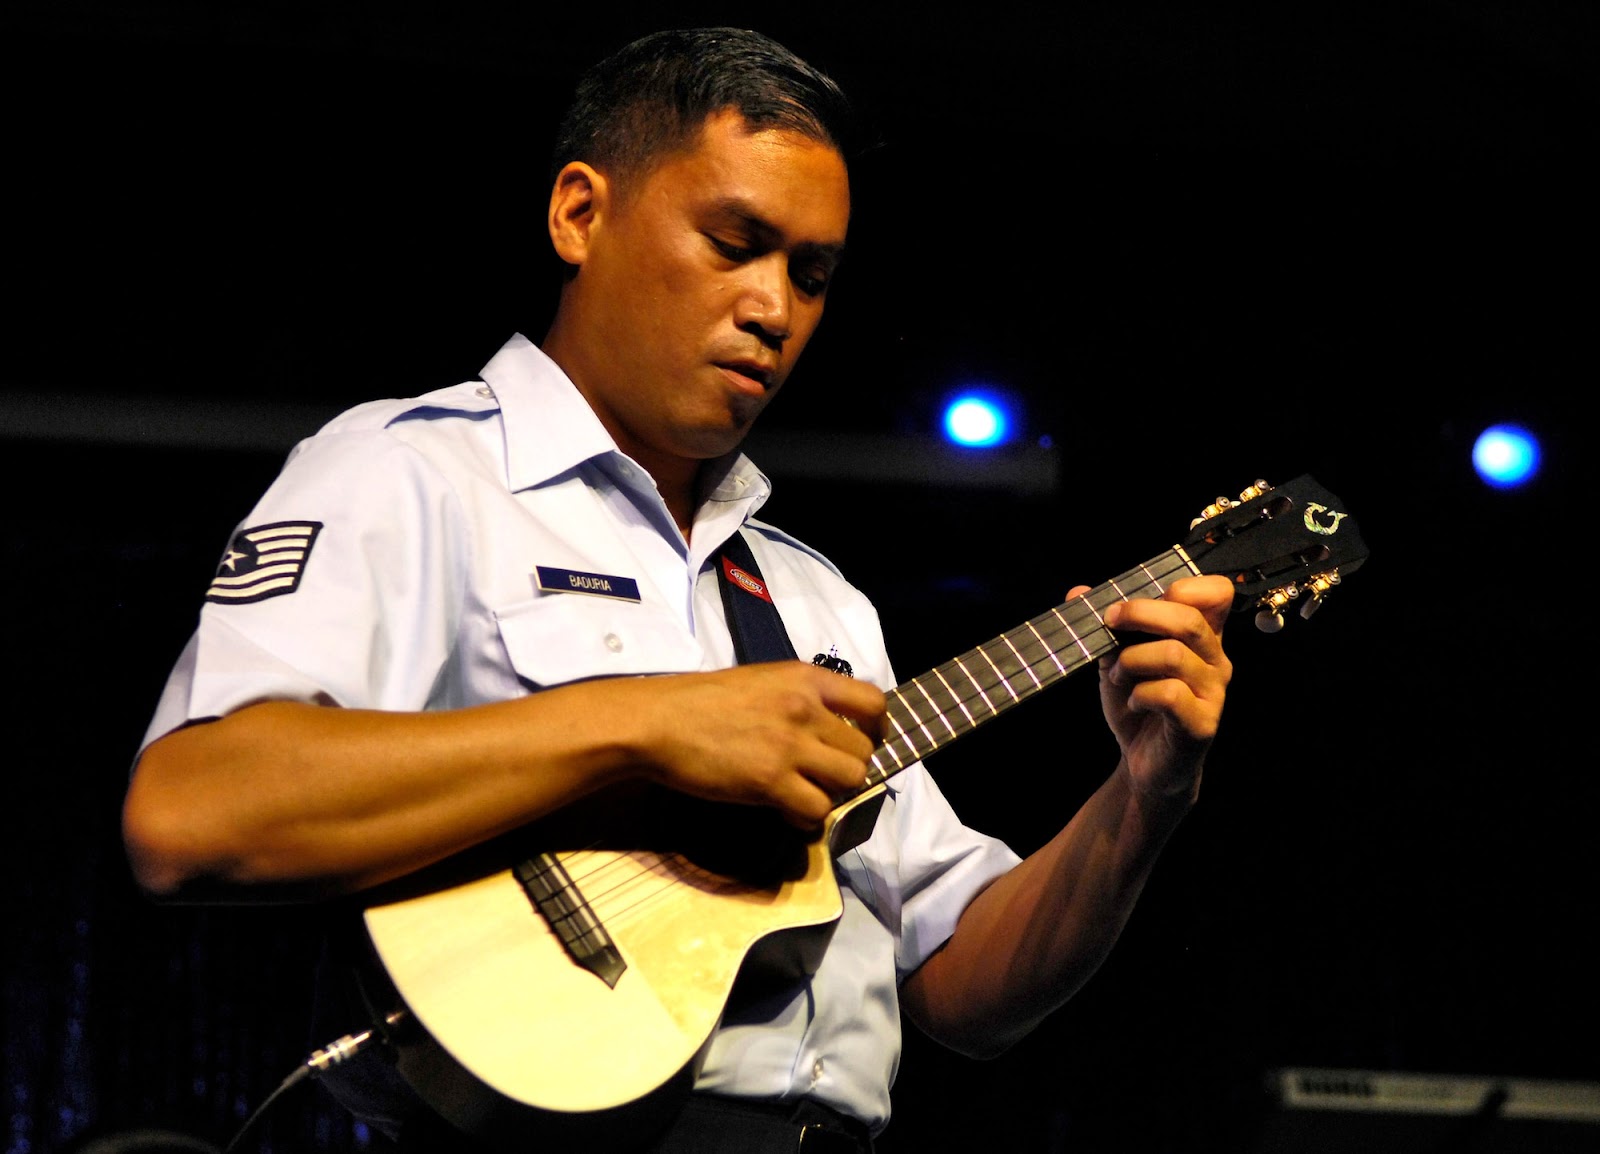 Uniquely ukulele: Airman plays from the heart